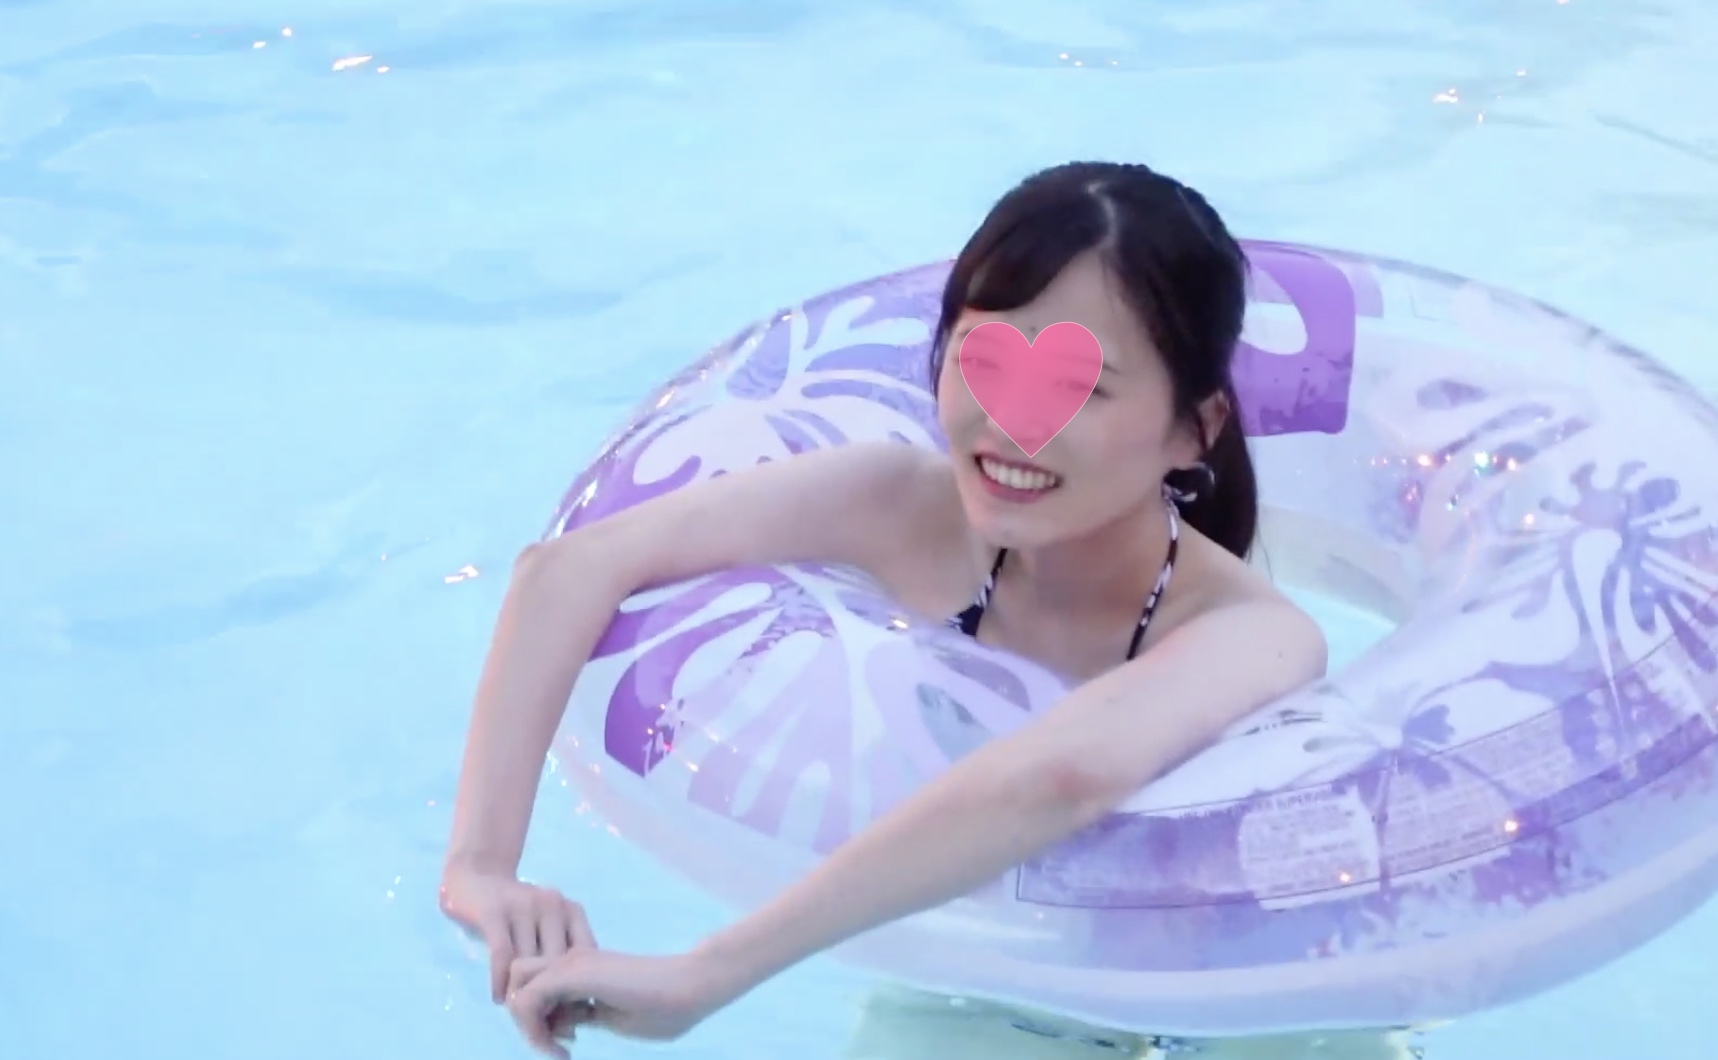 FC2-PPV 1503339 Overwhelming Beautiful Girl JD Yuka And Private Squirrel Shooting At The Night Pool Transparent Real Face With Glasses Removed Limited Release 2980pt 1980pt Purchase Privilege Available - Server 1